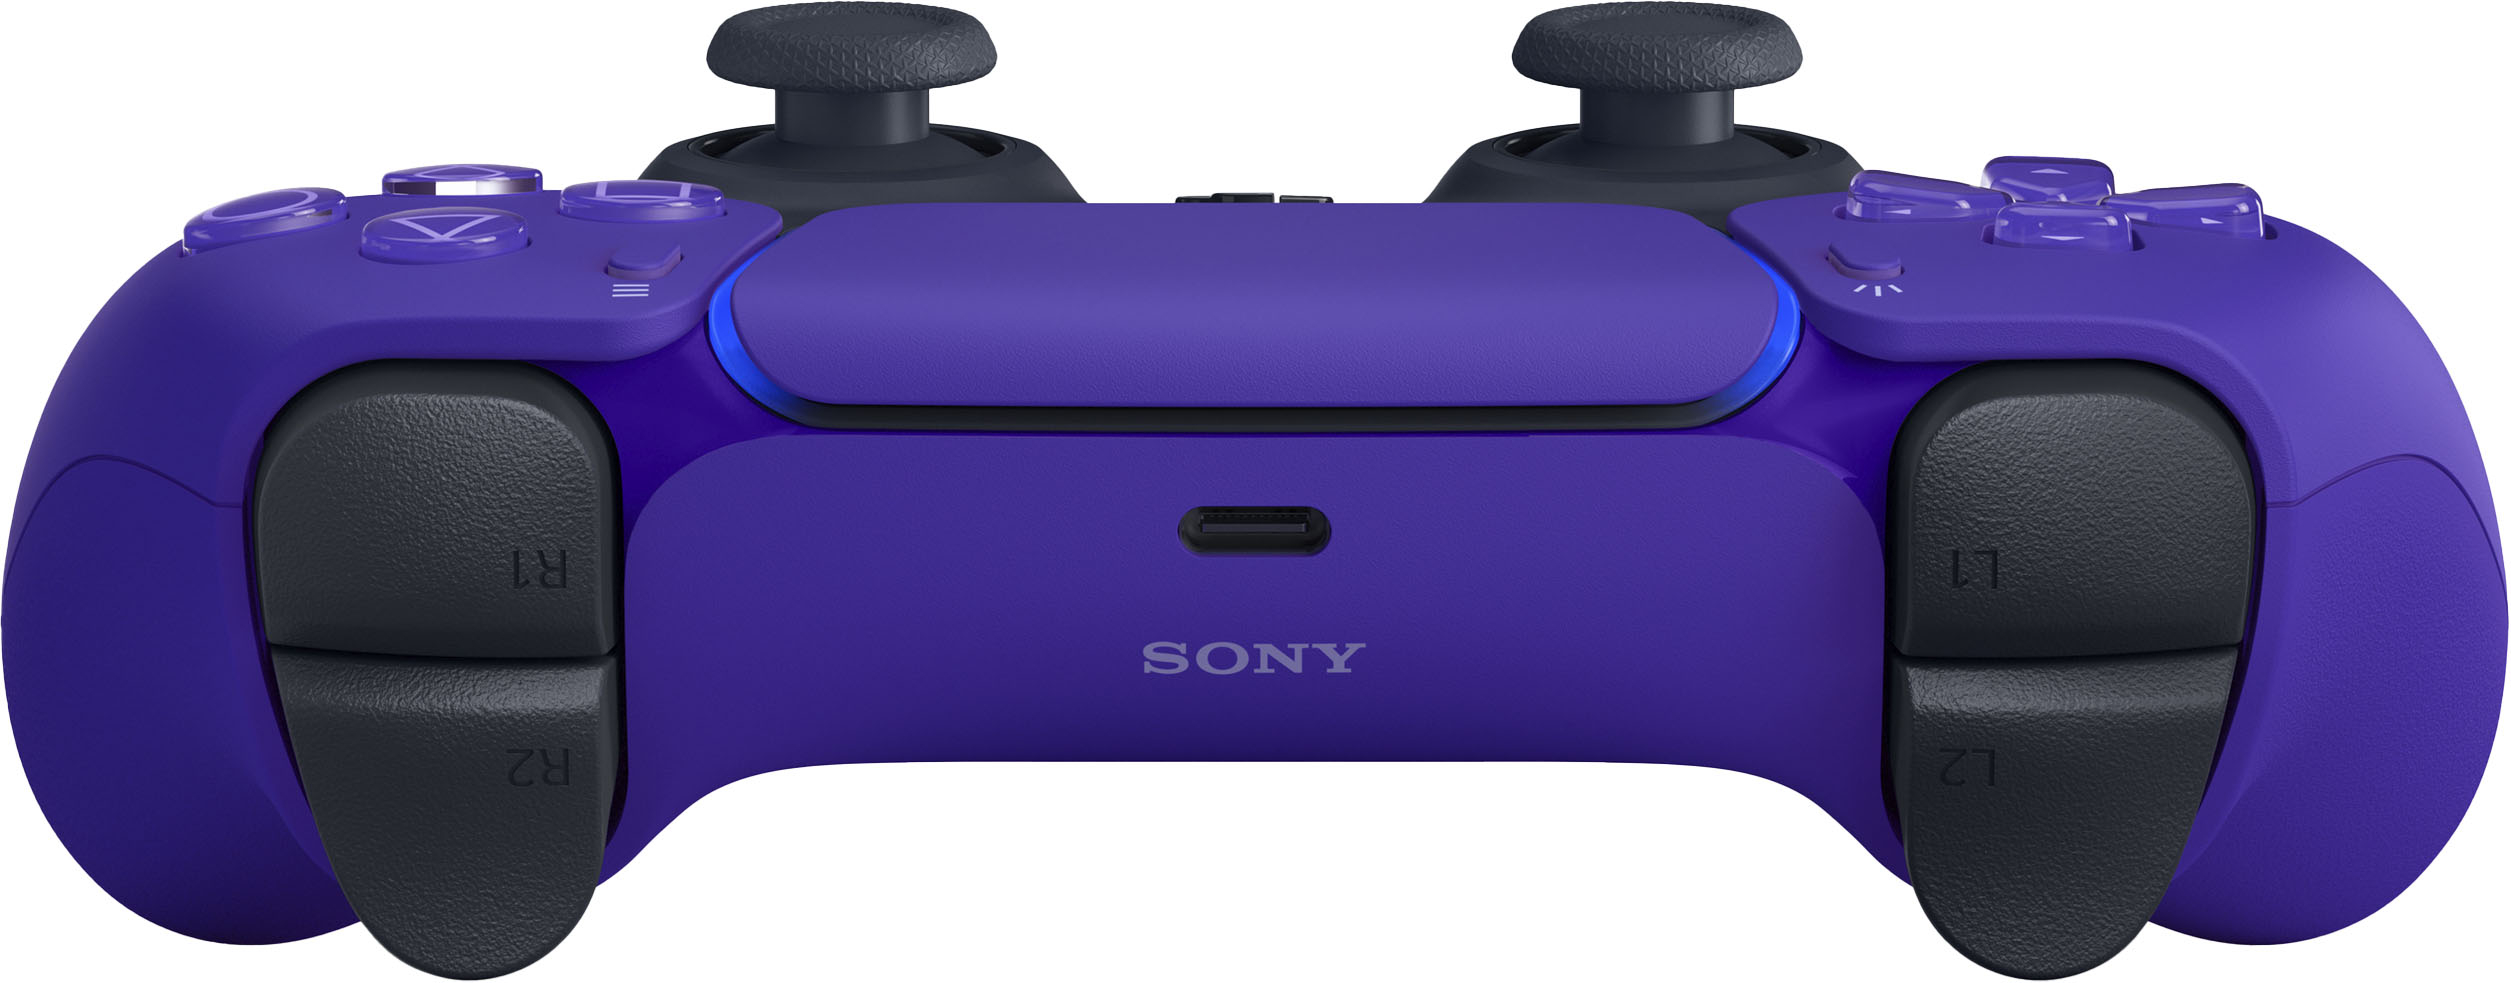 Back View: Sony - PlayStation 5 - DualSense Wireless Controller - Galactic Purple